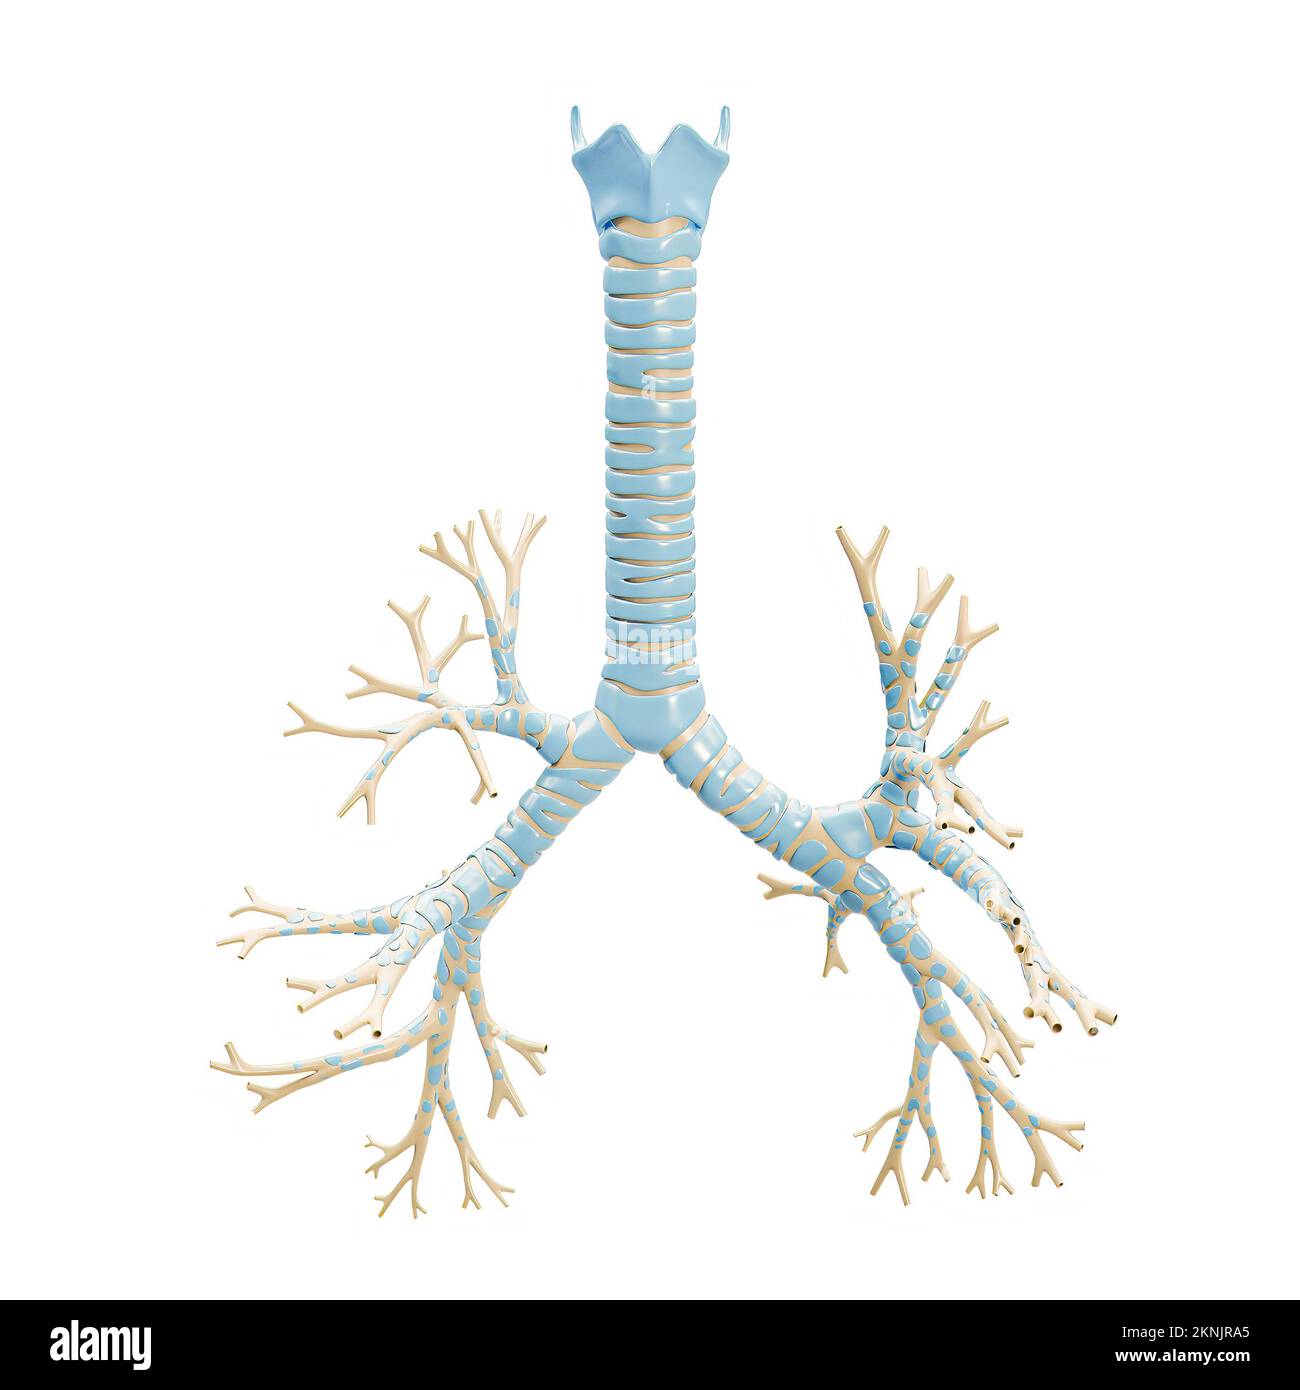 Accurate bronchial tree with trachea and thyroid cartilage 3D rendering illustration on white background. Blank anatomical diagram or chart of the bro Stock Photo